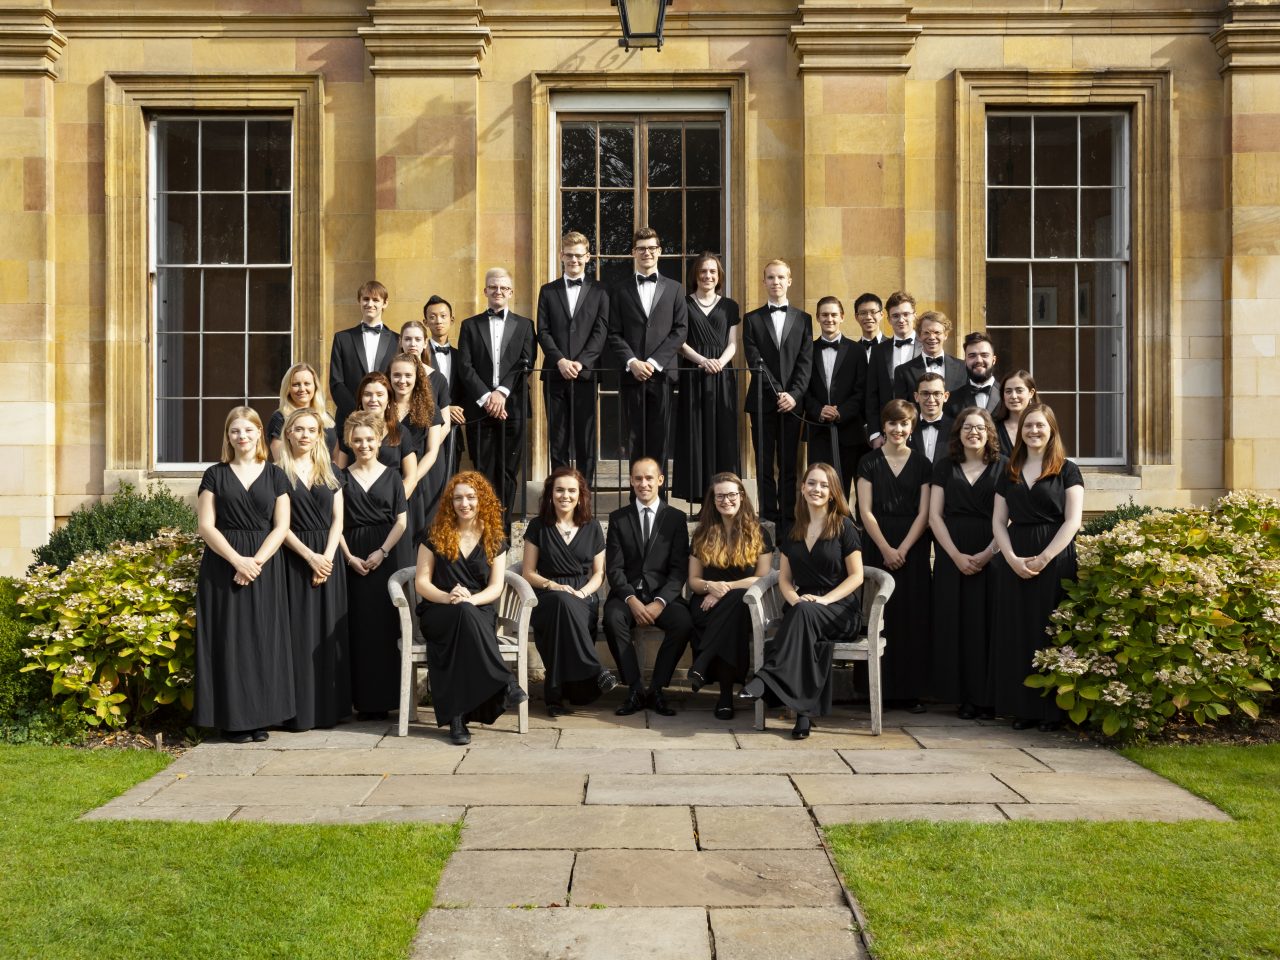 The Choir of Clare College